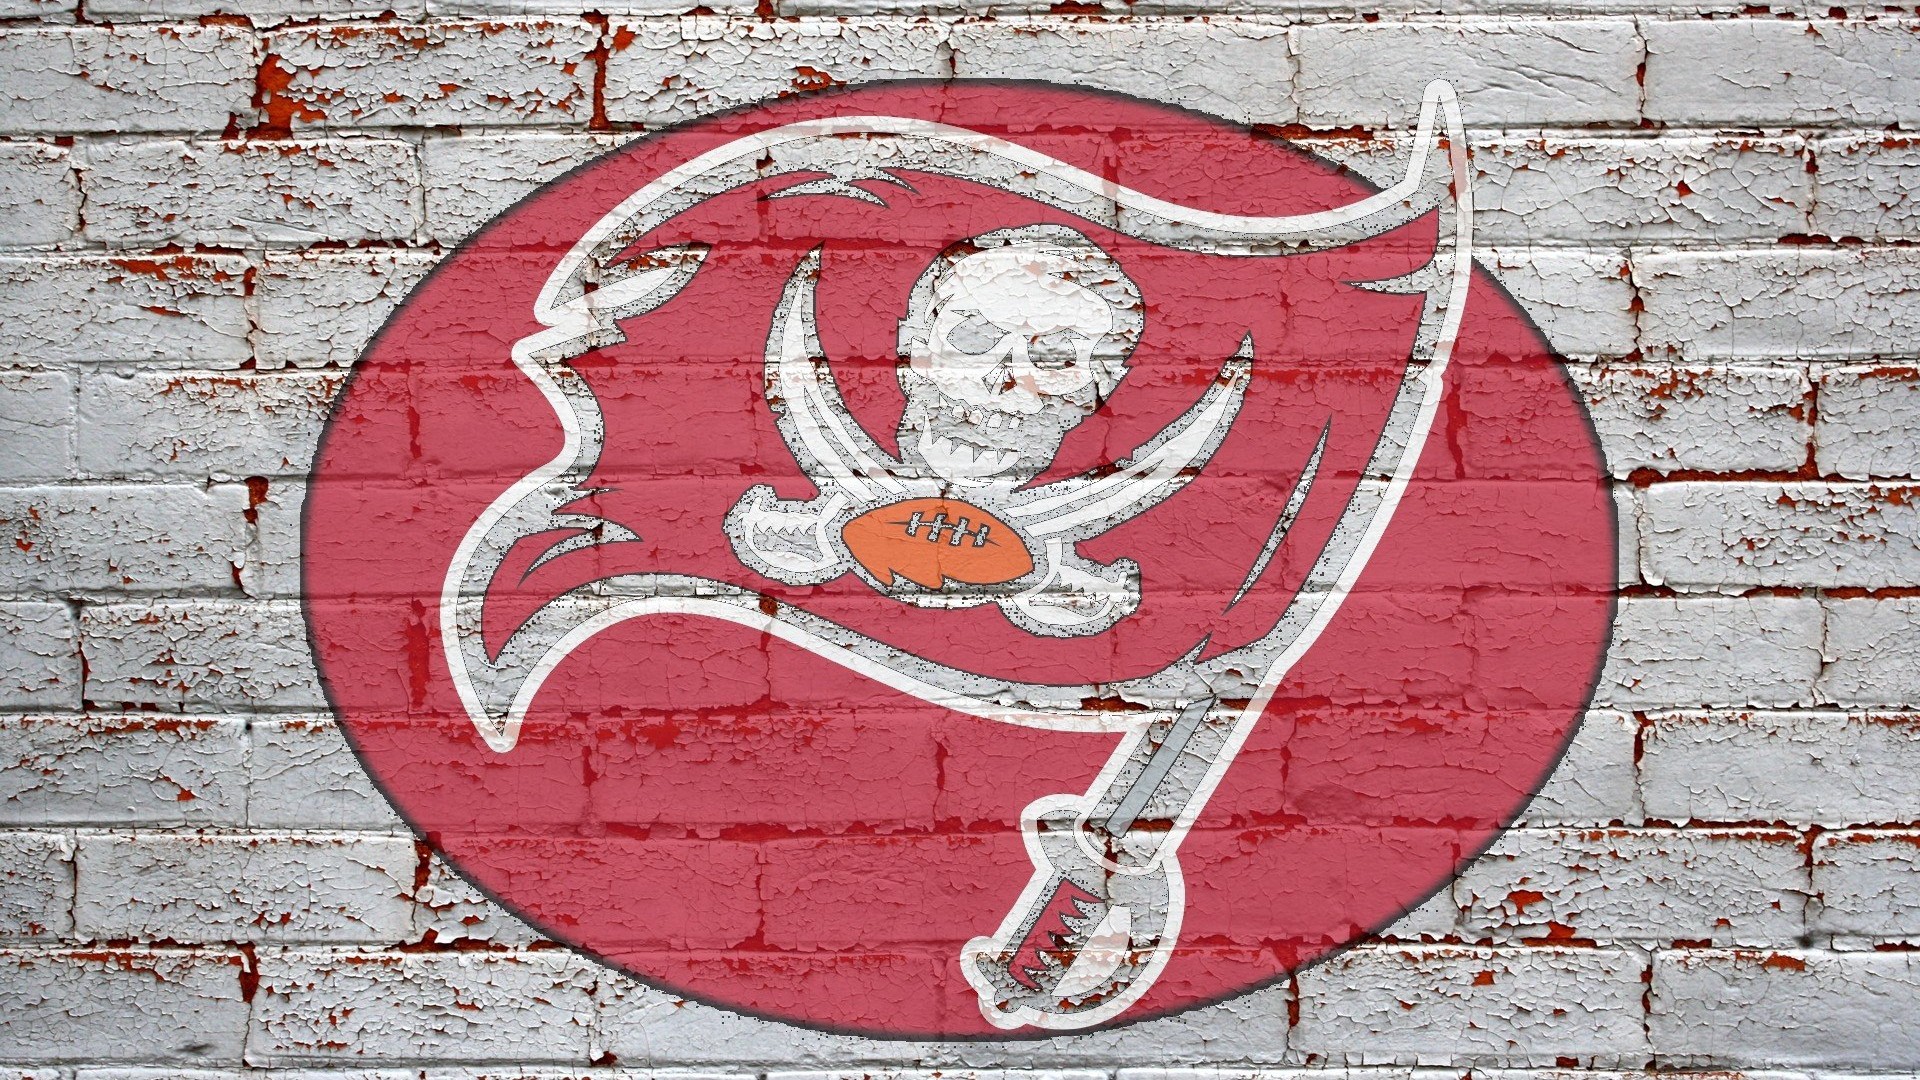 PC Wallpaper Buccaneers with high-resolution 1920x1080 pixel. Download and set as wallpaper for Desktop Computer, Apple iPhone X, XS Max, XR, 8, 7, 6, SE, iPad, Android